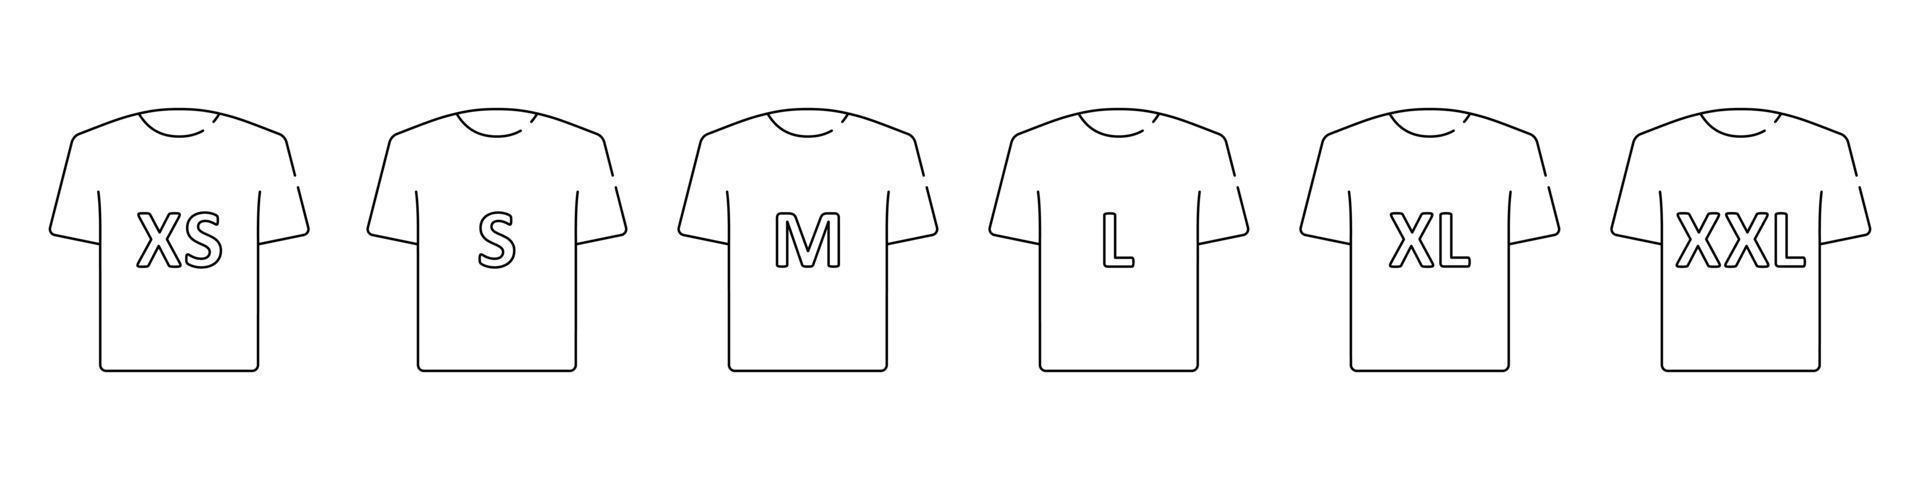 T-shirt size. Clothing size label or tag. From XS to XXL. Vector